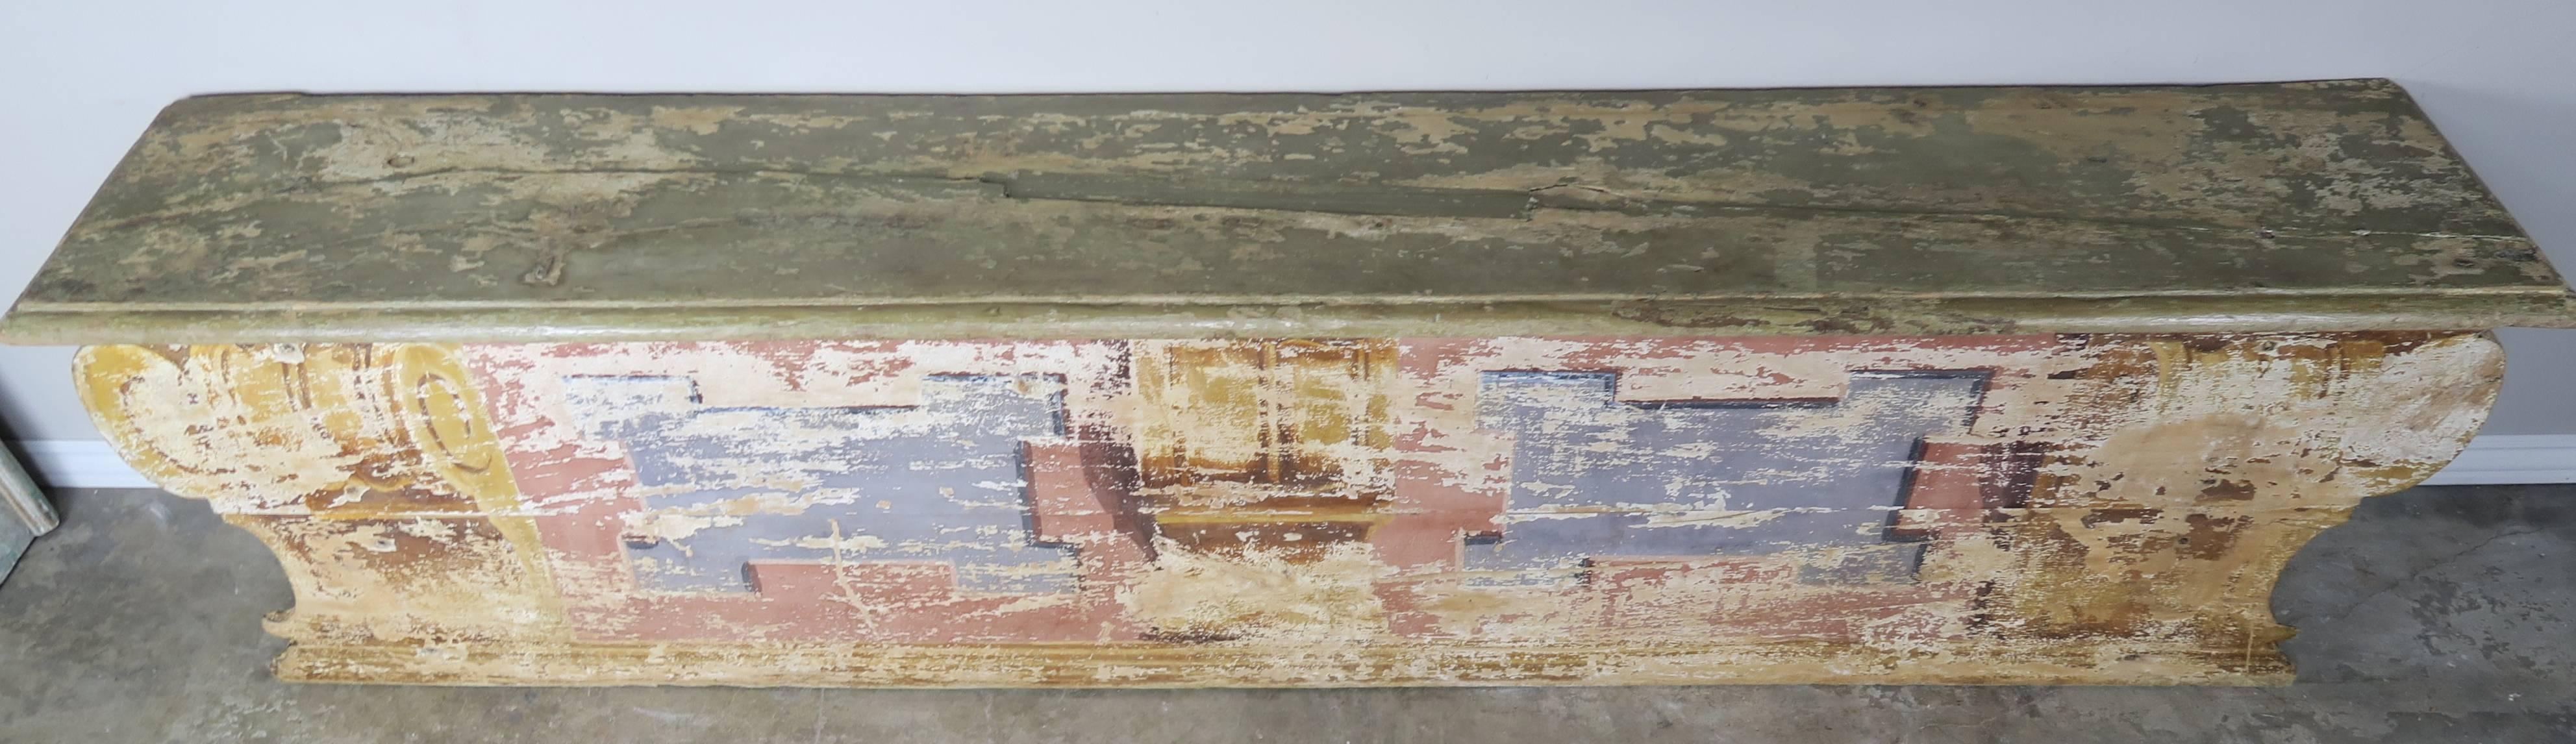 Pair of 19th century Italian painted benches. The seat on one bench opens to storage underneath. The second bench is simply a bench. They are a matching pair except for the storage area and would be beautiful flanking a dining table.